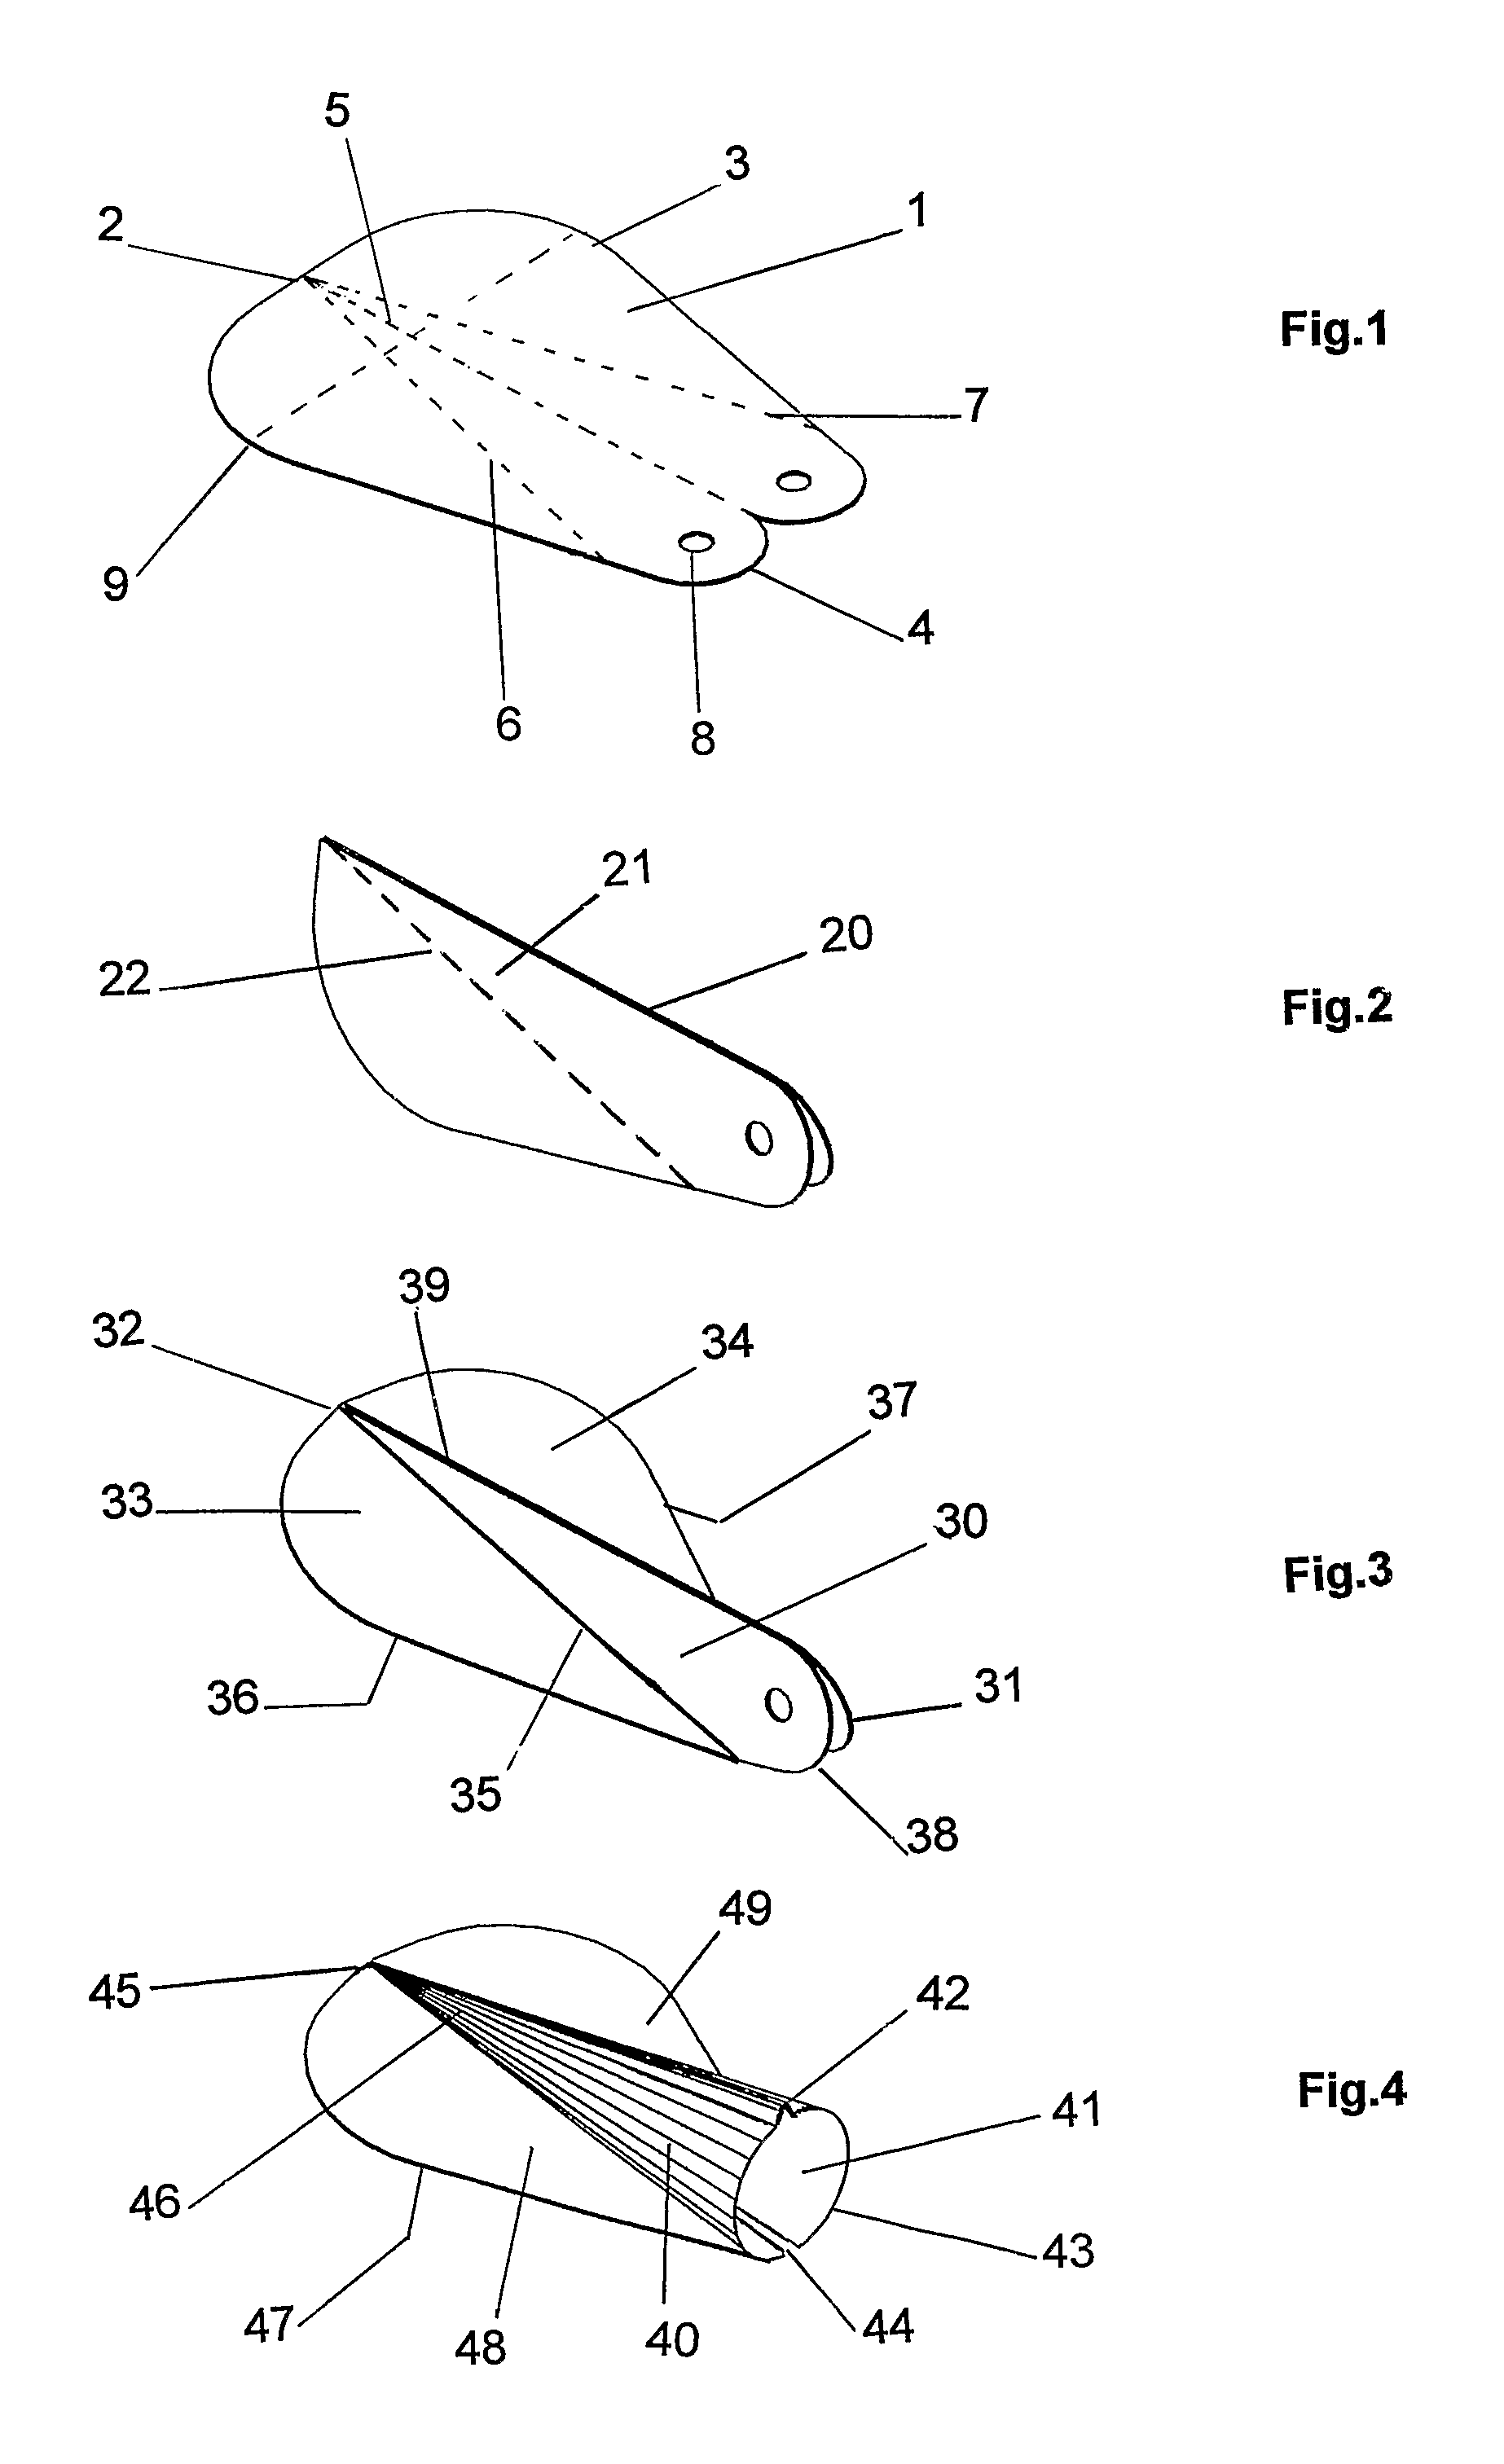 Multi-function surface treatment tool